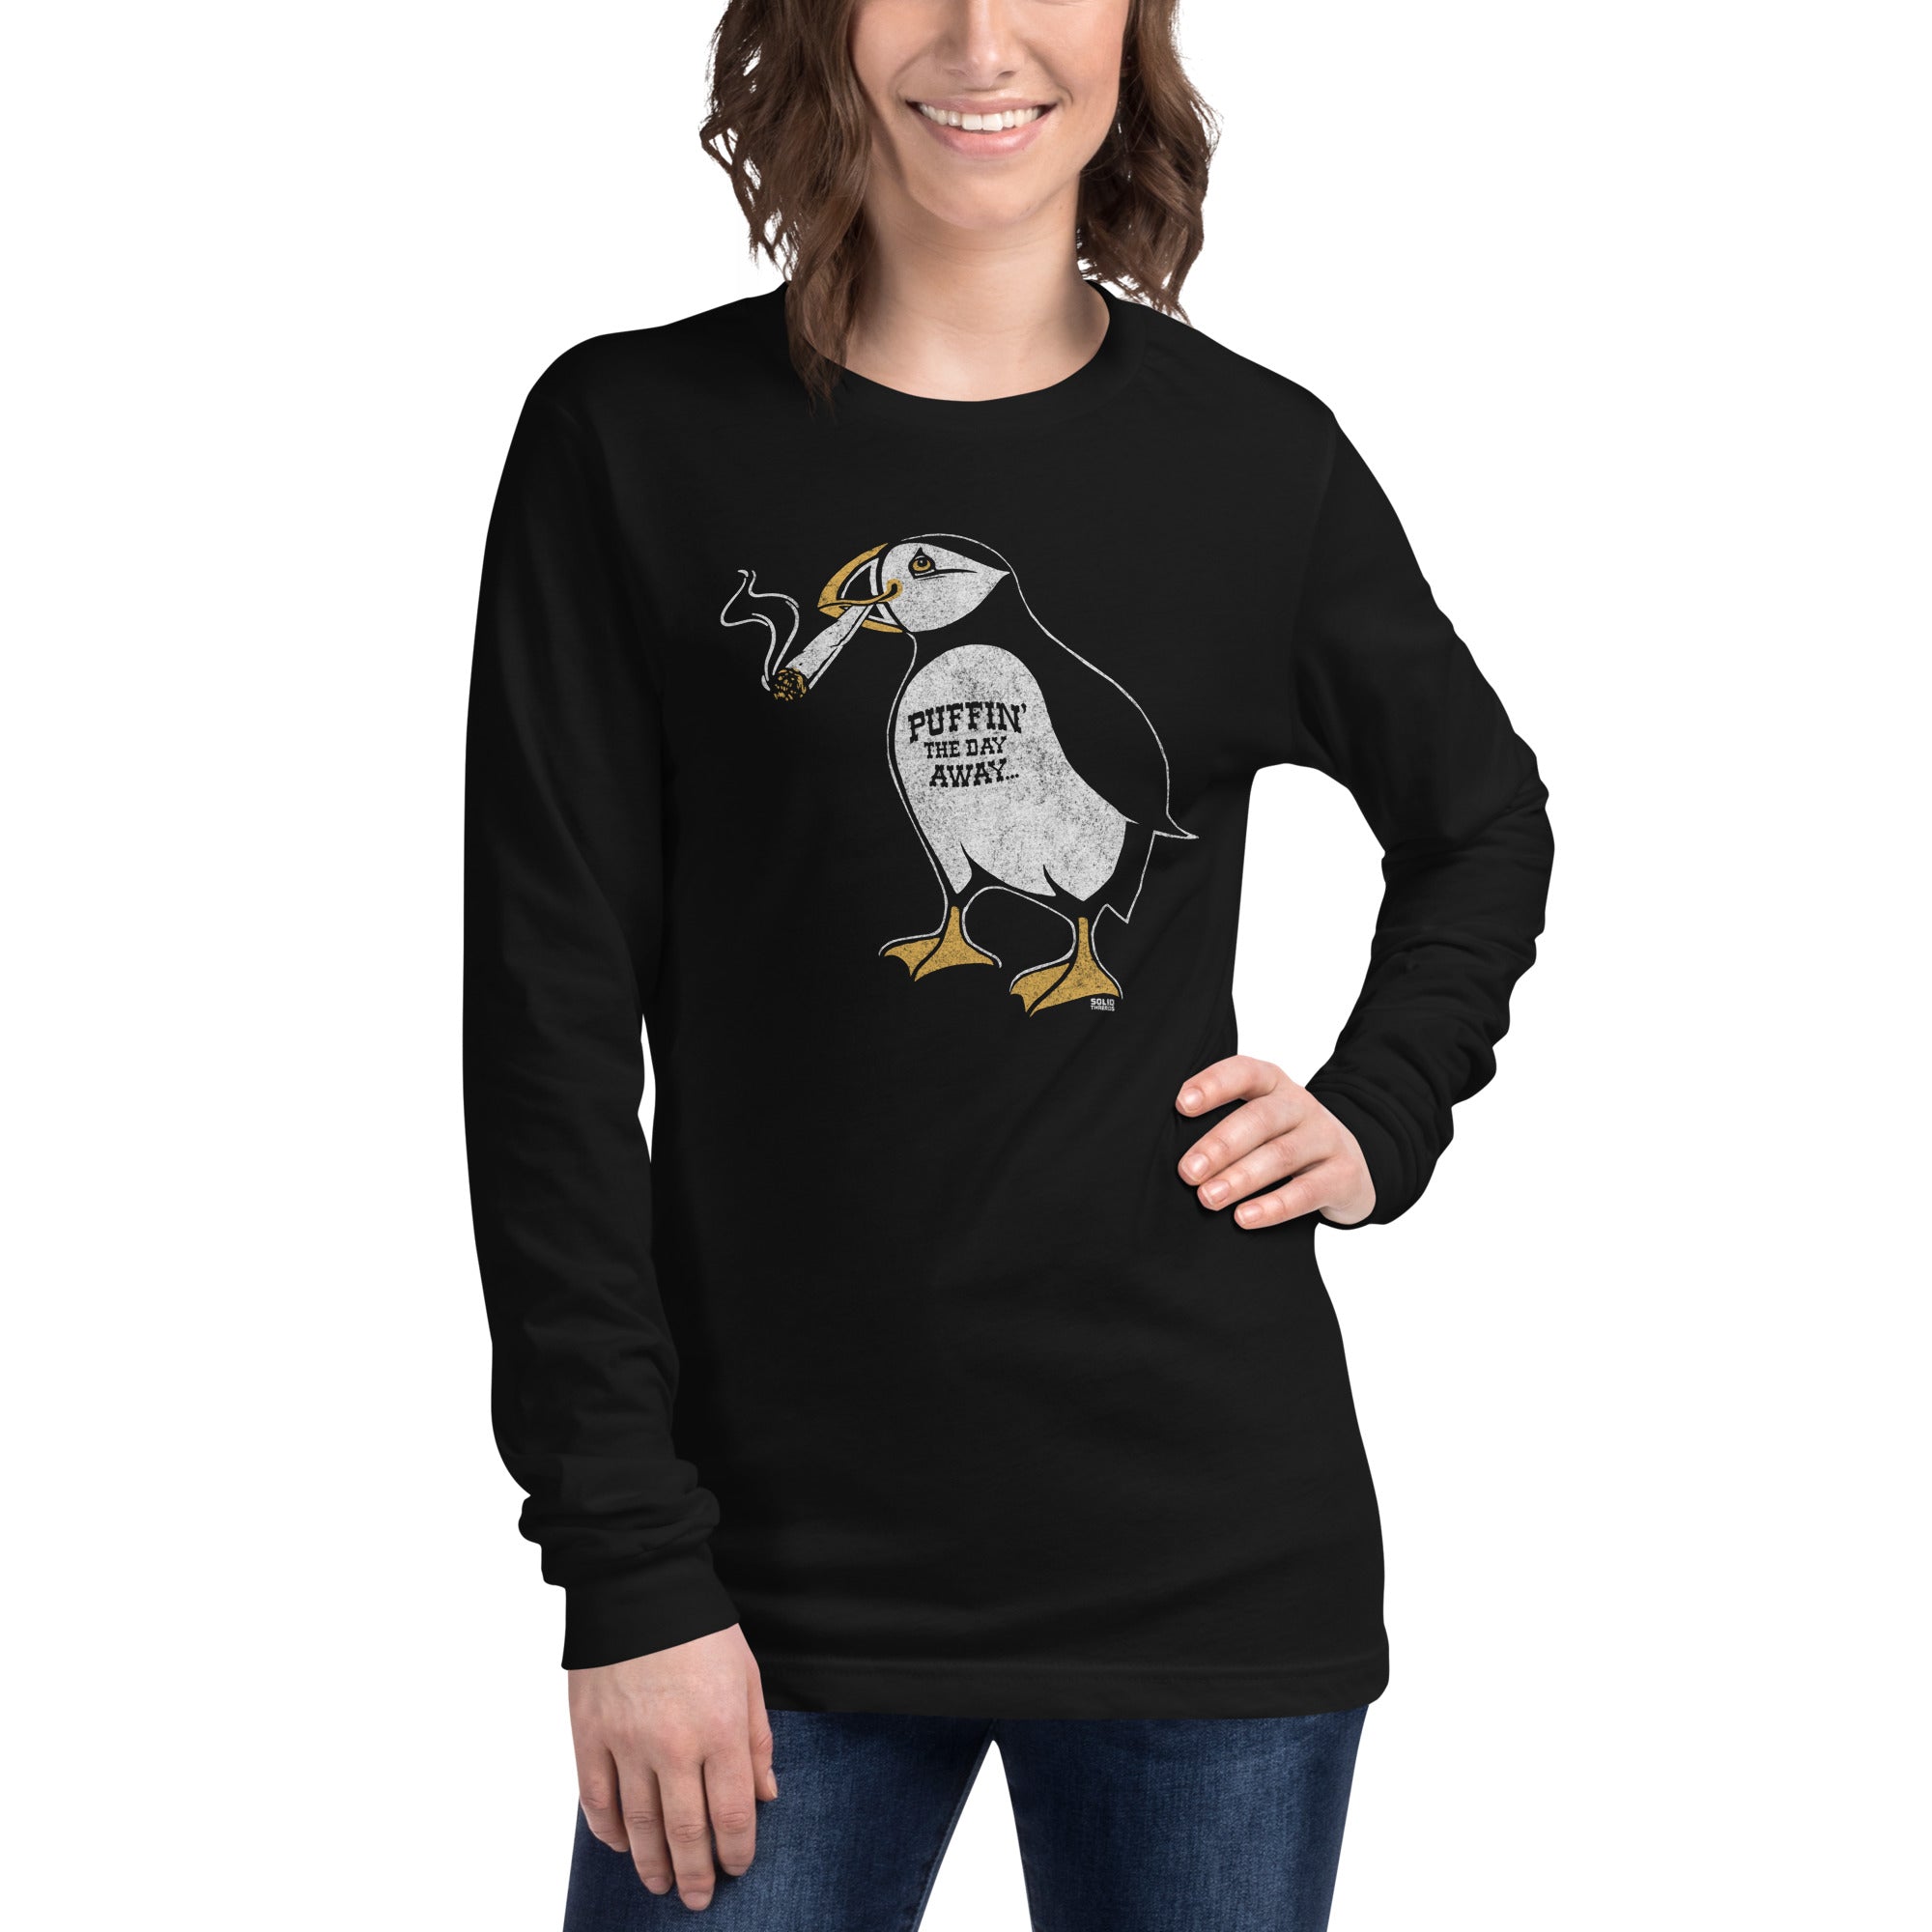 Puffin Away Vintage Long Sleeve T Shirt | Funny Marijuana Graphic Tee | Solid Threads